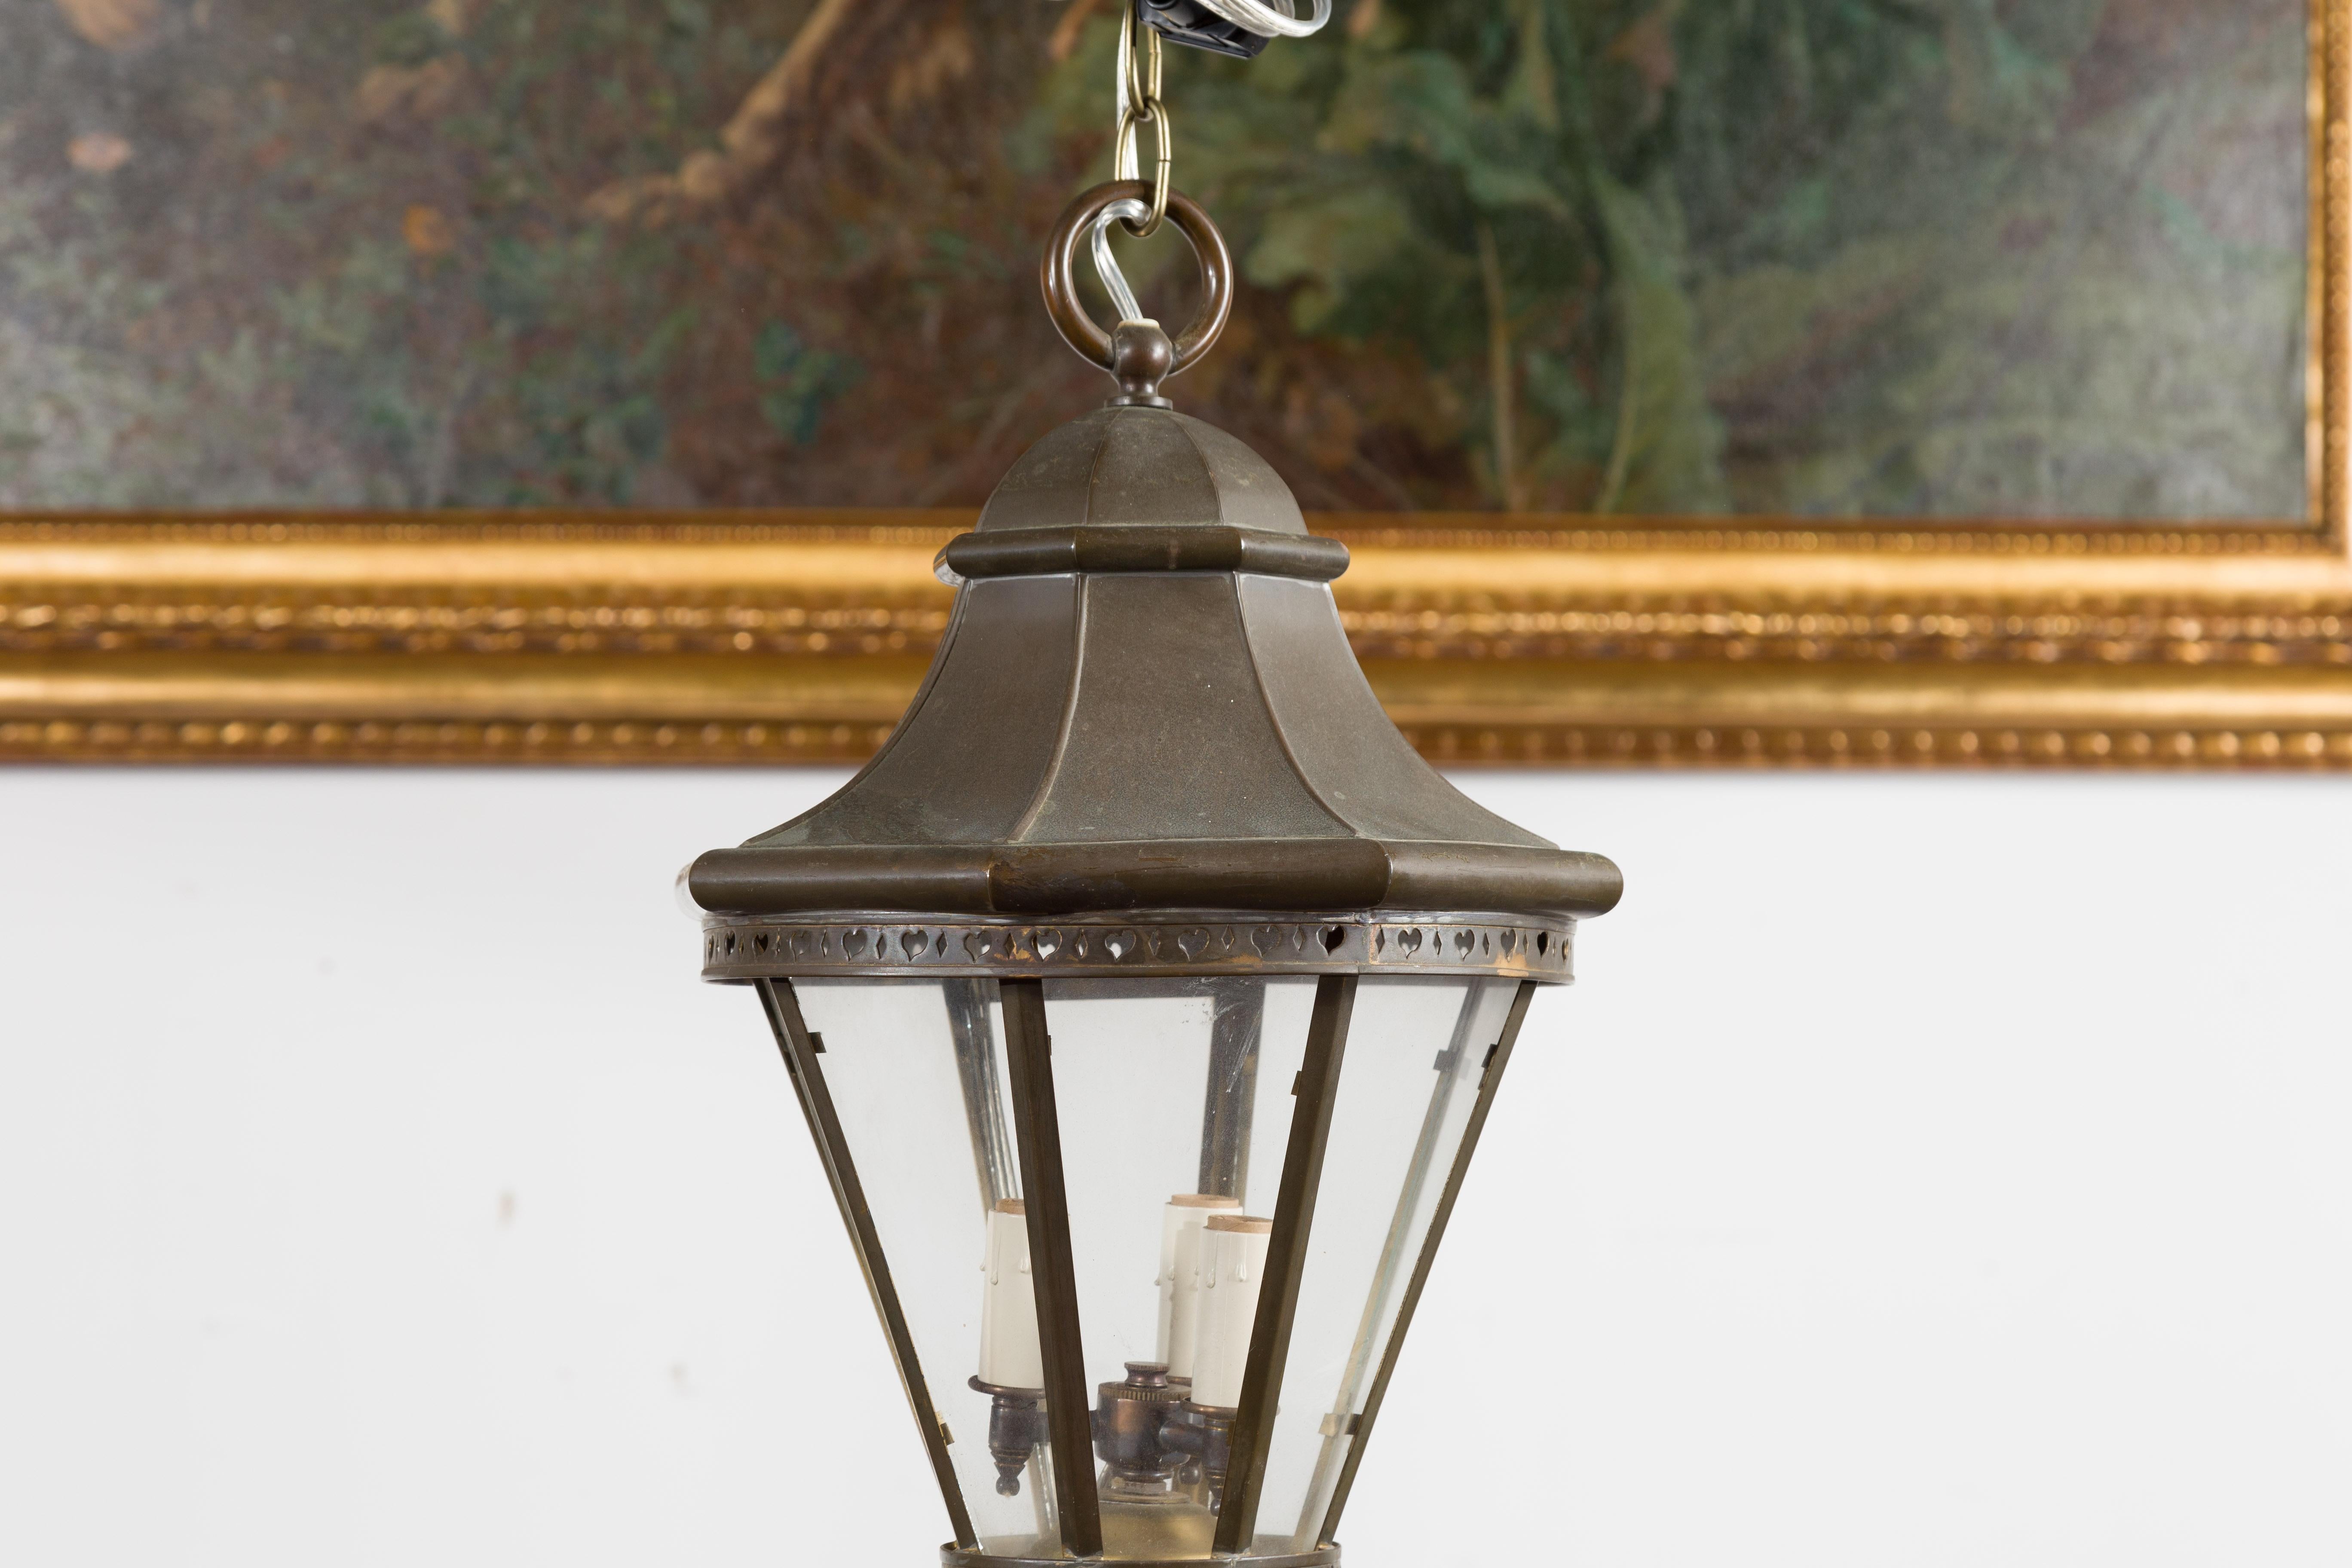 Petite English Turn of the Century Copper and Glass Lantern with Three Lights 1